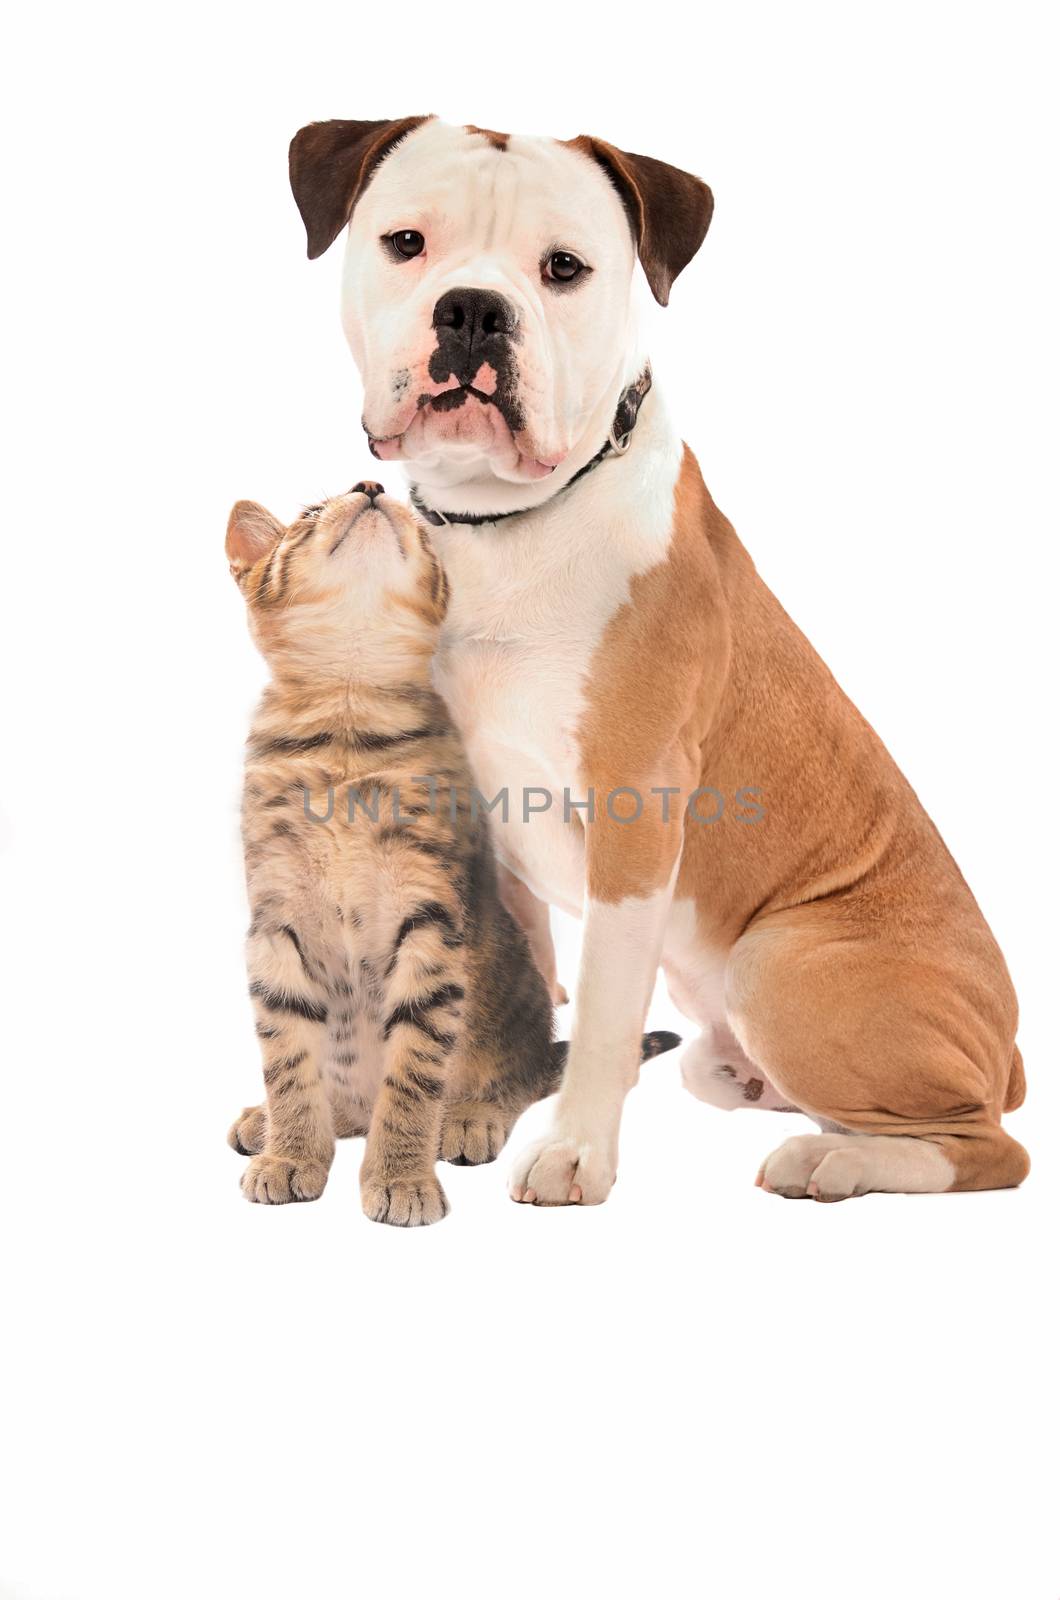 An olde English Bulldog and kitten on a white backgroud.